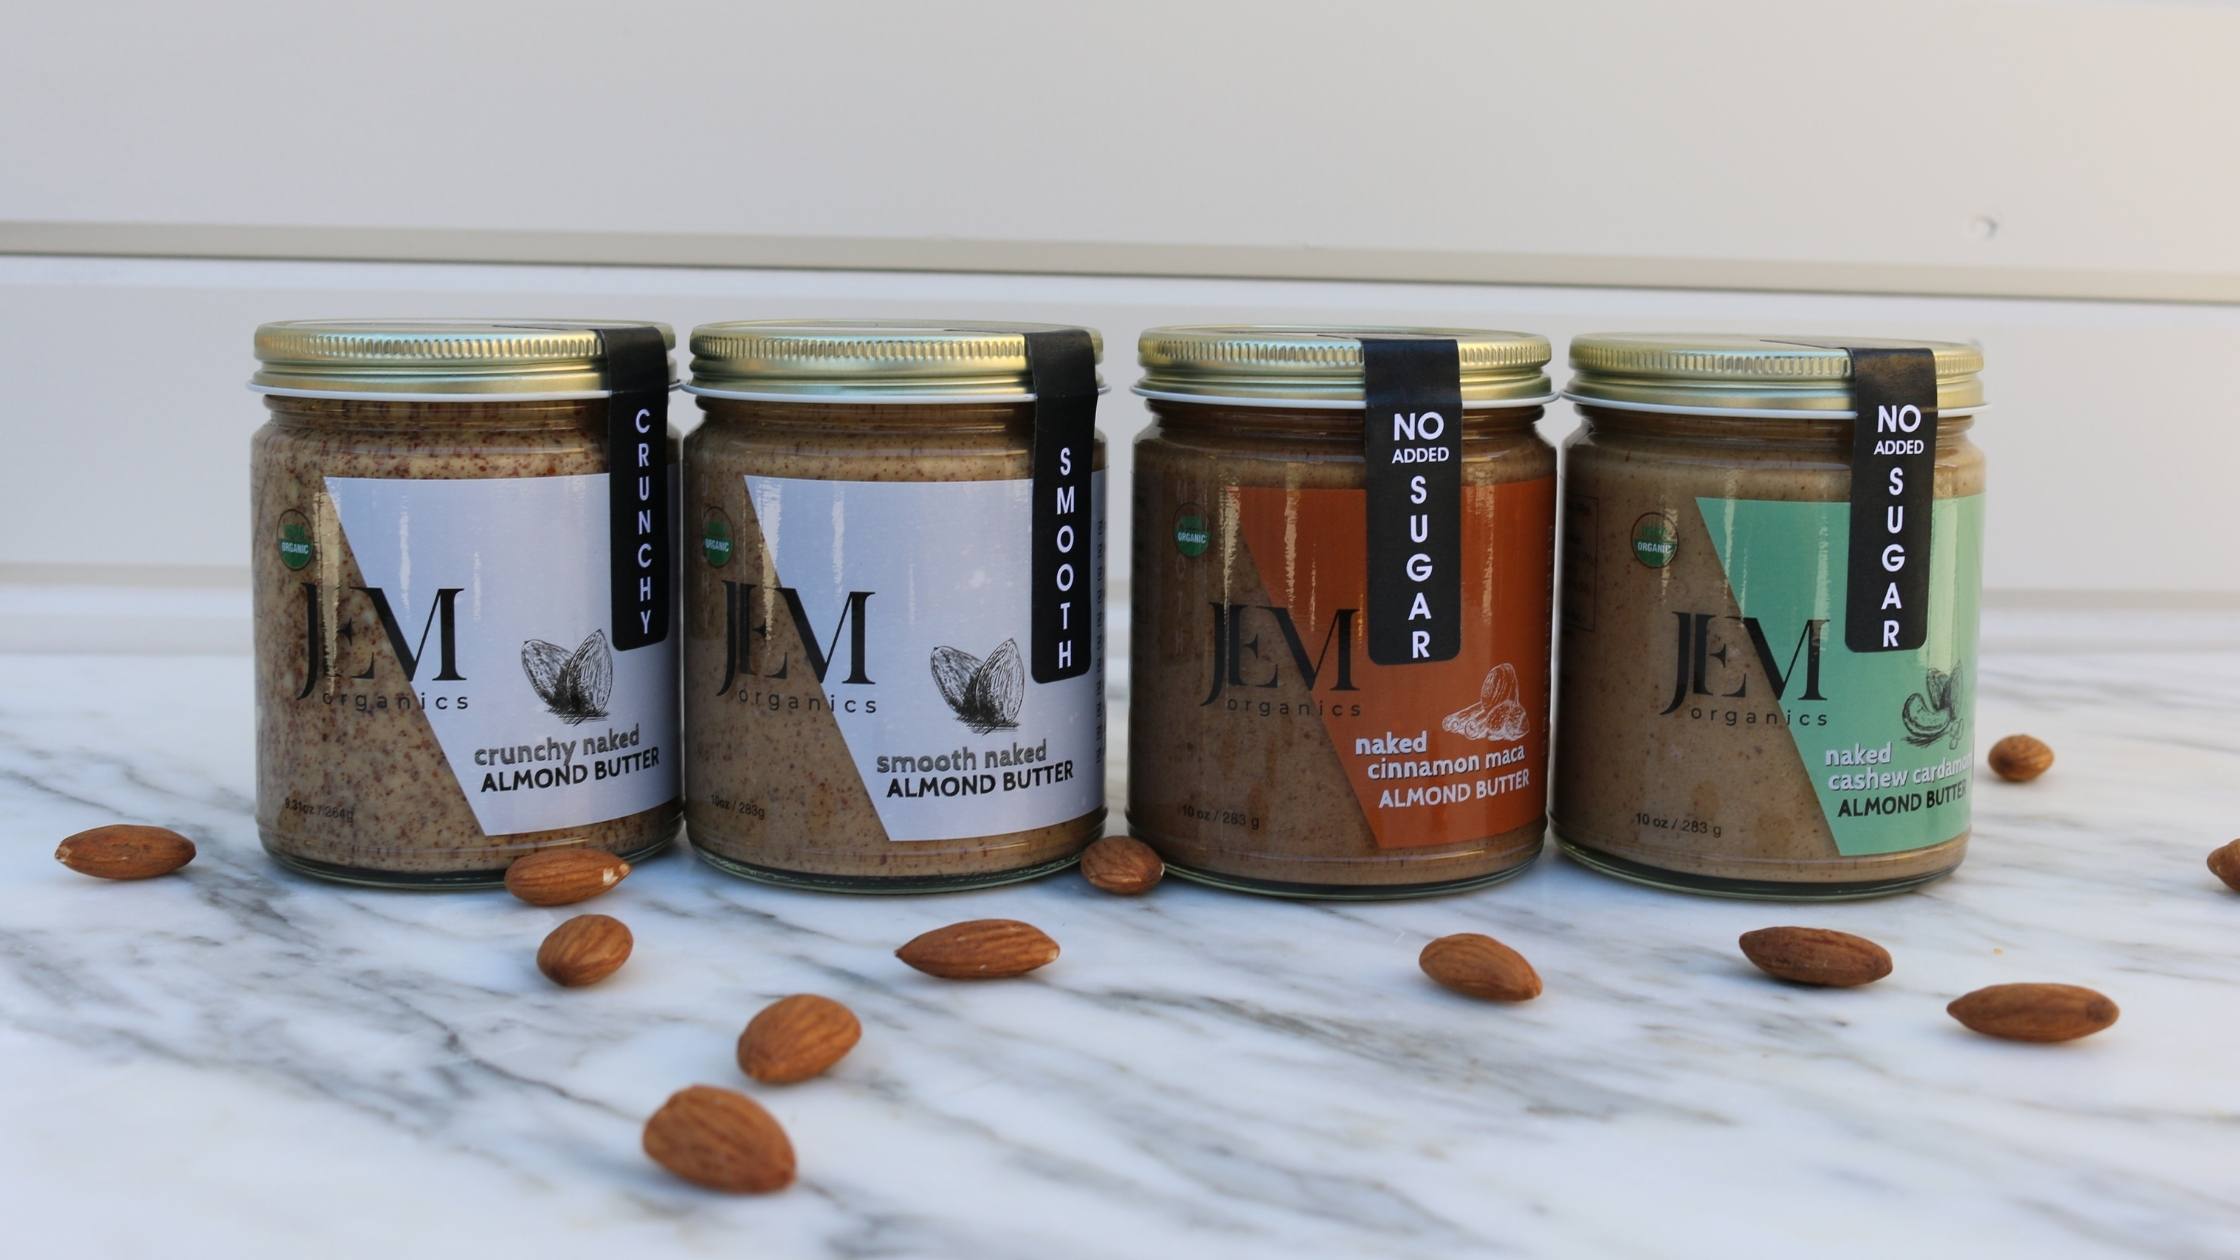 JEM Organics four No Sugar Added nut butters lined up on a marble table